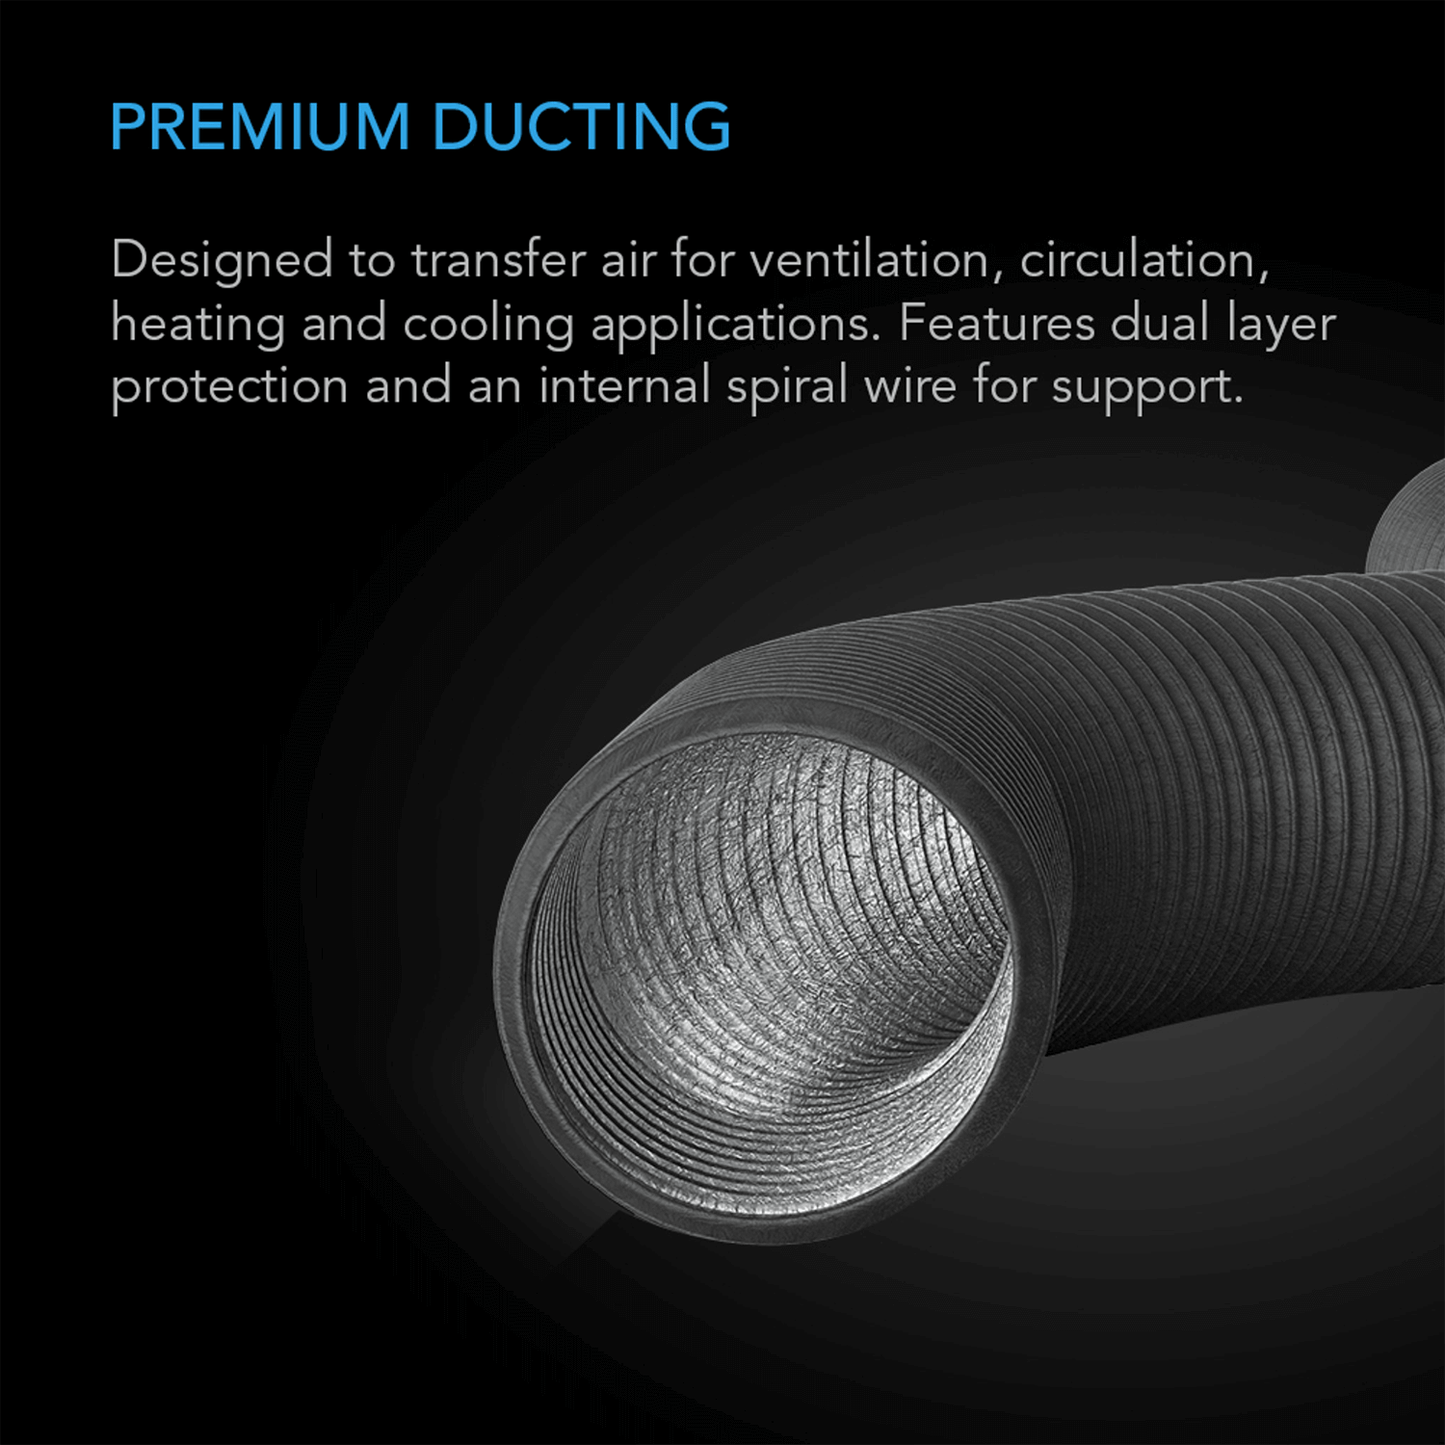 AC Infinity Flexible Four-Layer Ducting, 25-FT Long, 8-Inch | AI-DTA8 | Grow Tents Depot | Climate Control | 819137020375